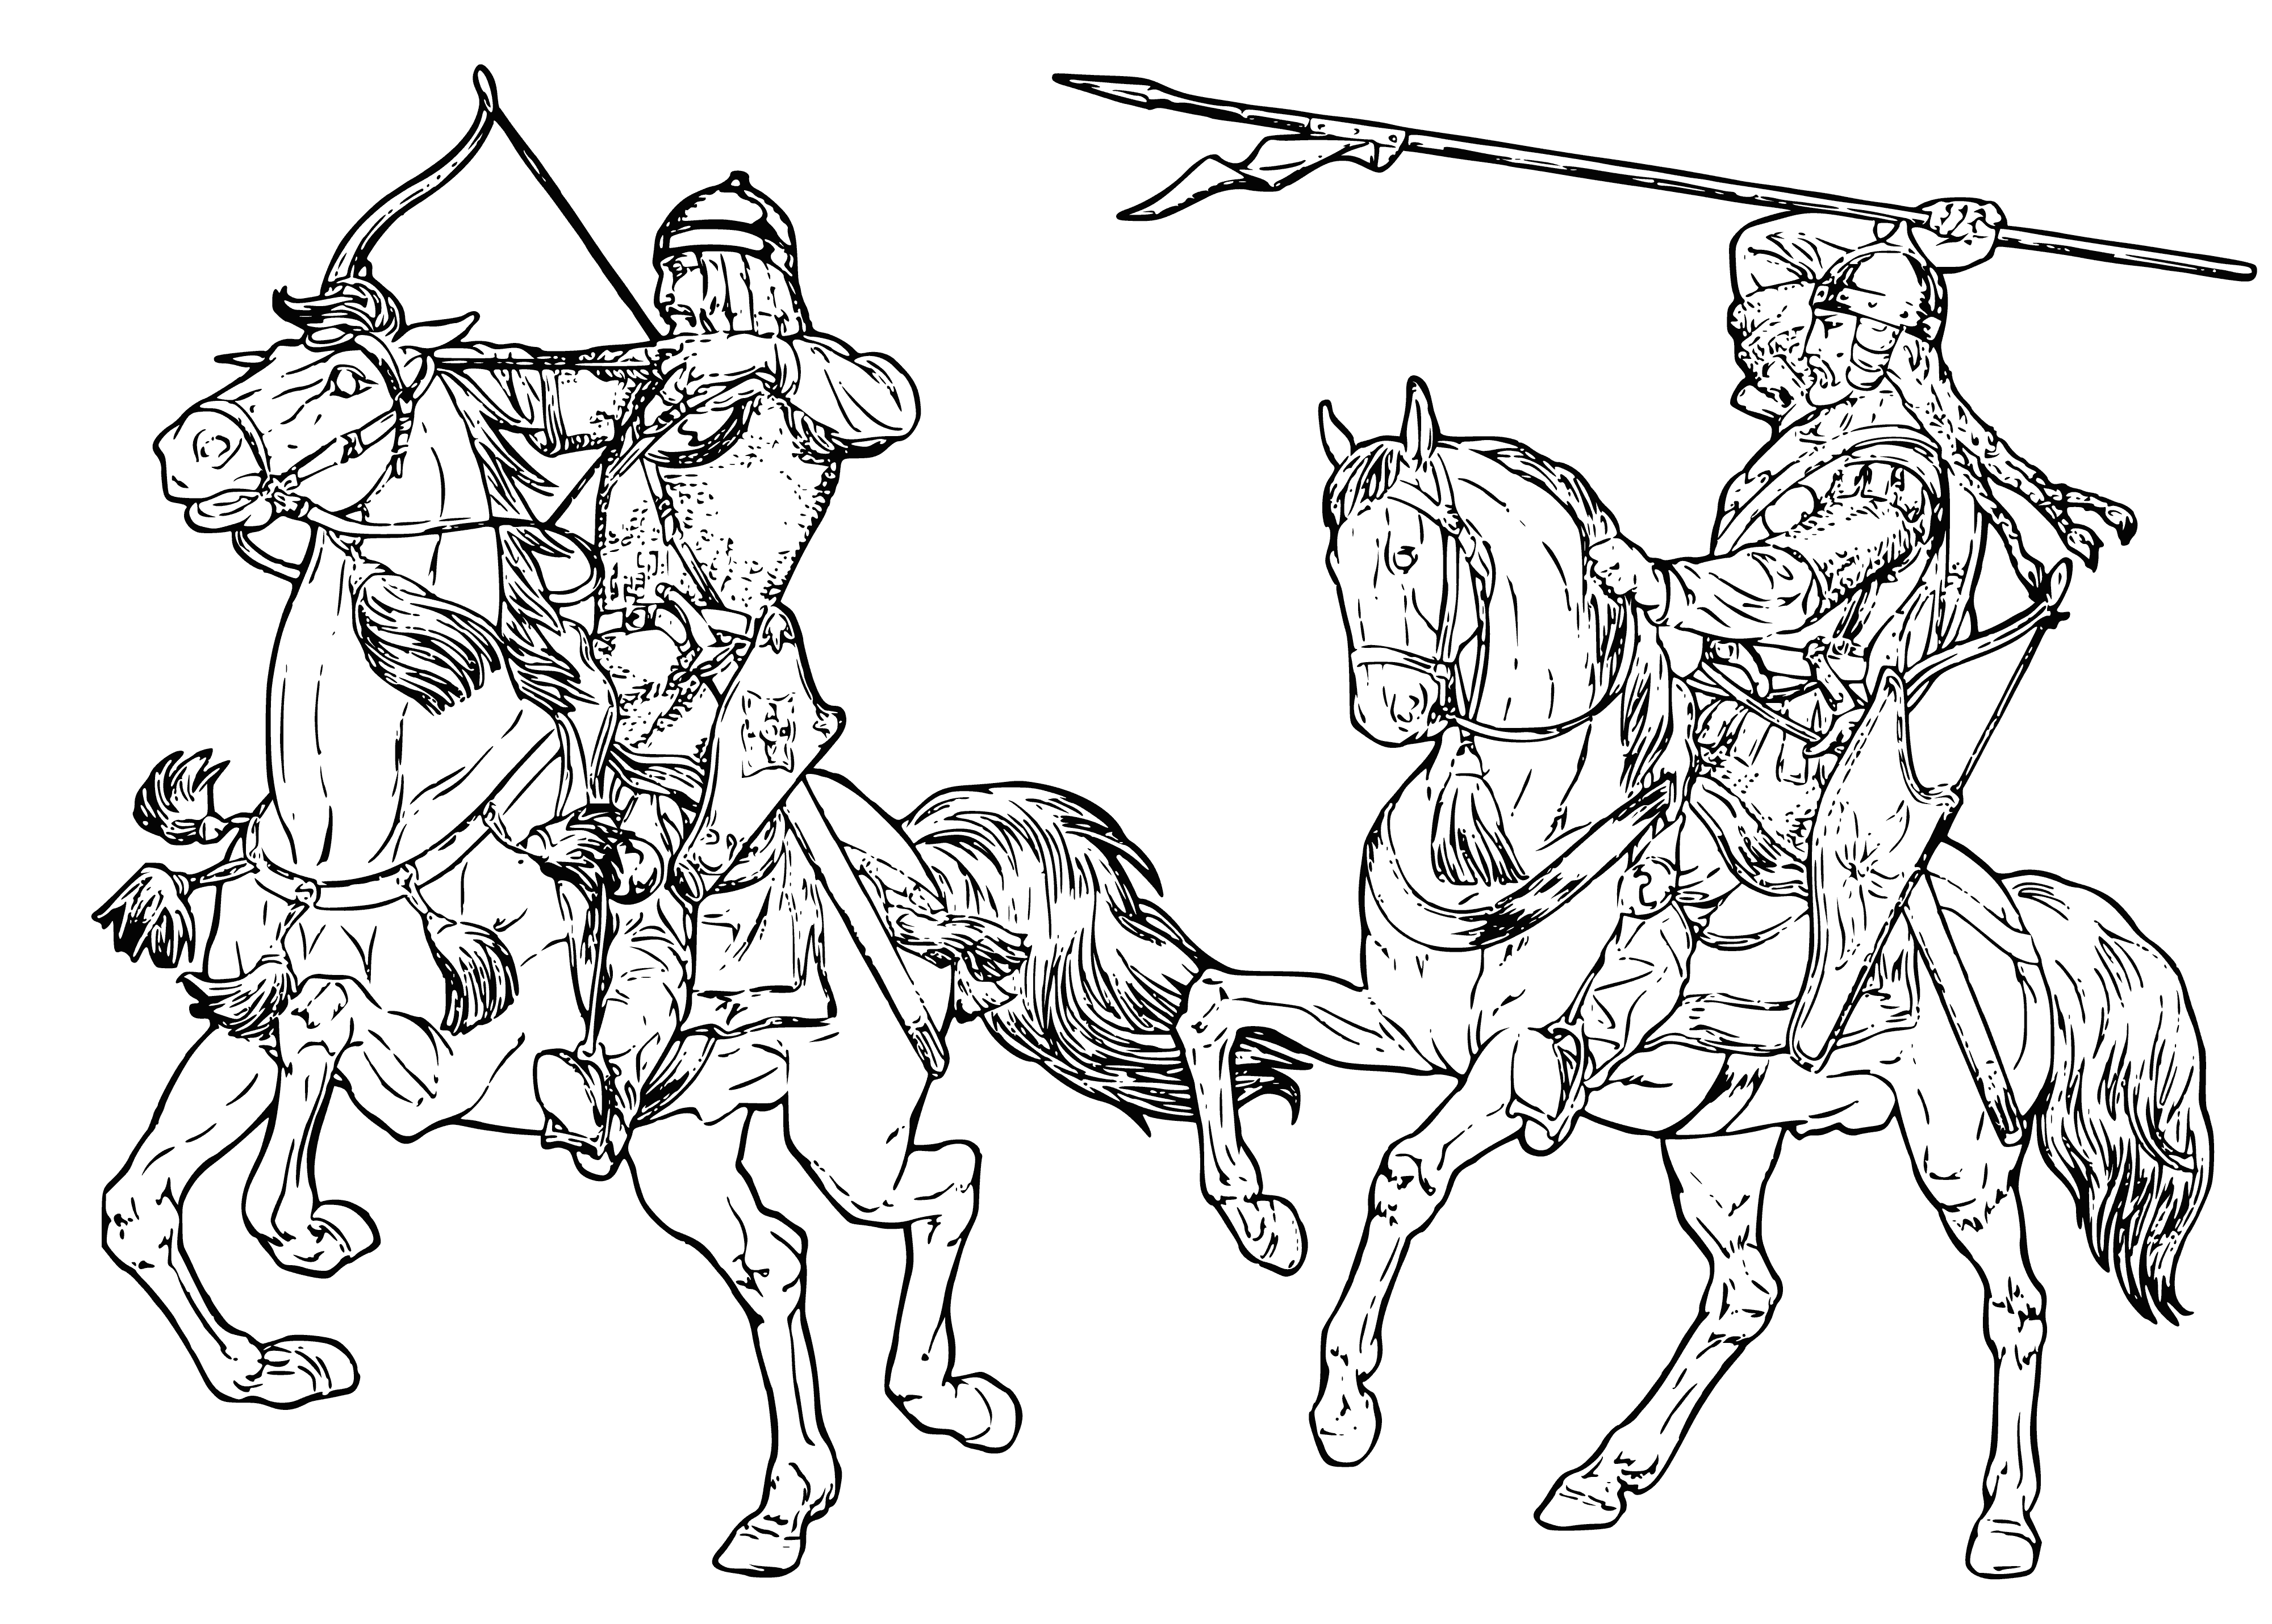 coloring page: Armored warriors on Bays w/ lances & swords ready for battle.